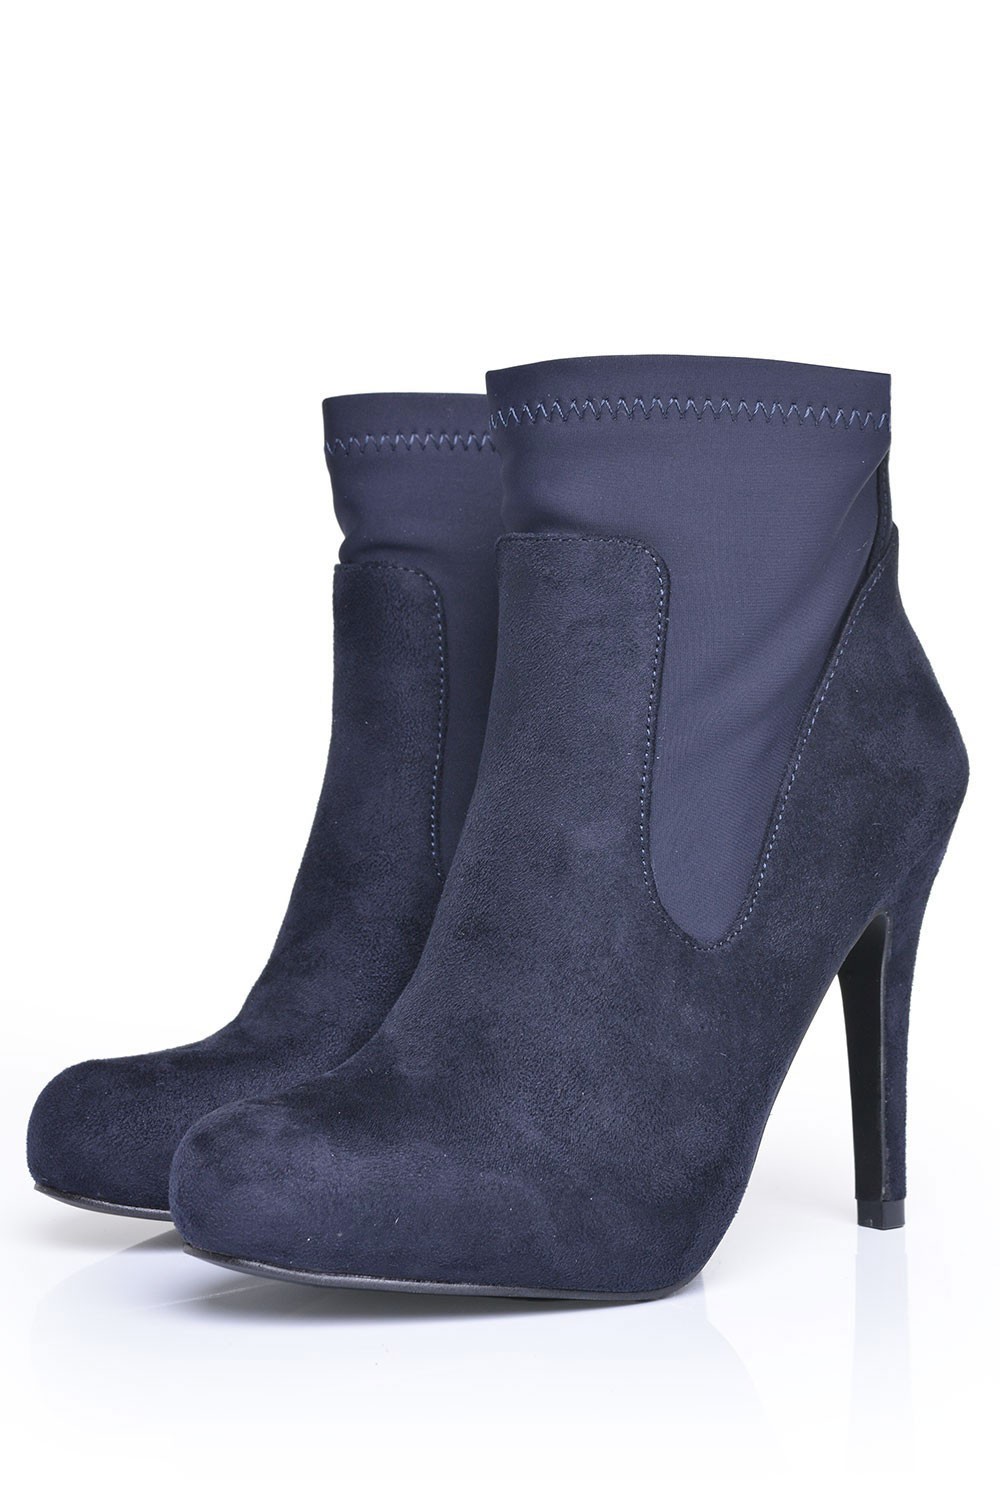 Sole City Gilda Stretch Ankle Boot in Dark Navy | iCLOTHING